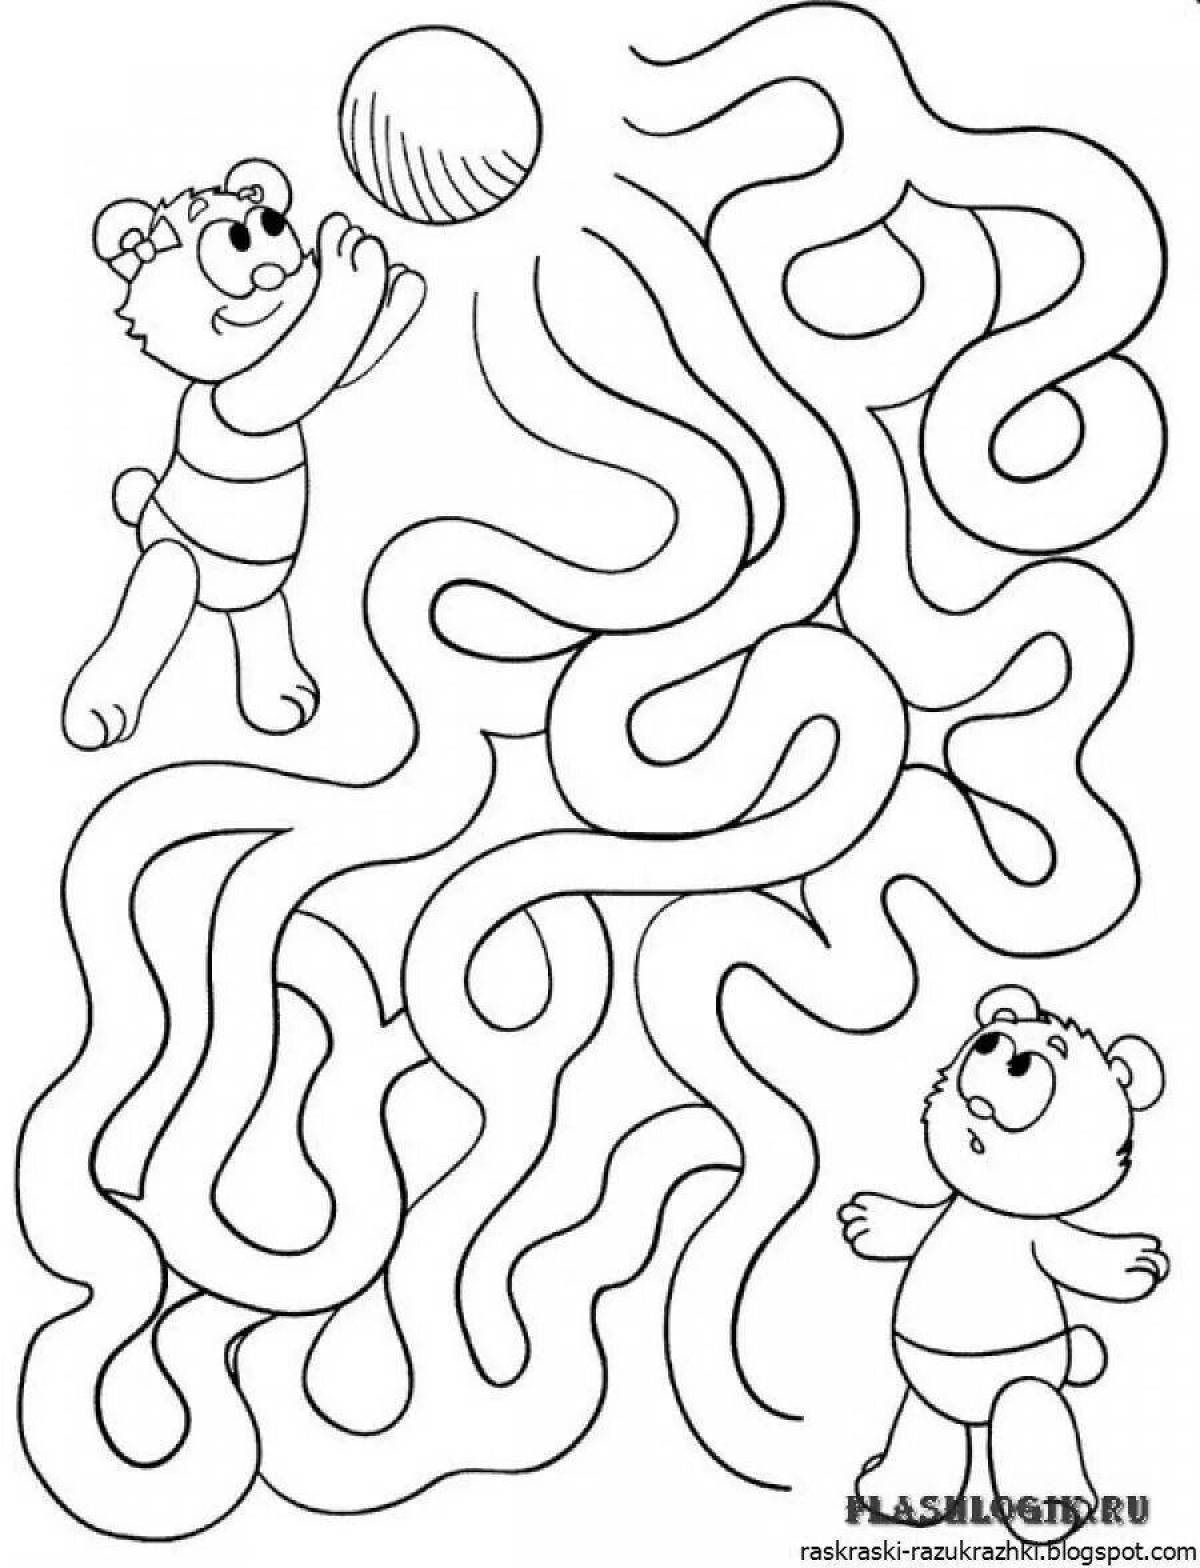 Colorful maze coloring for children 3-4 years old